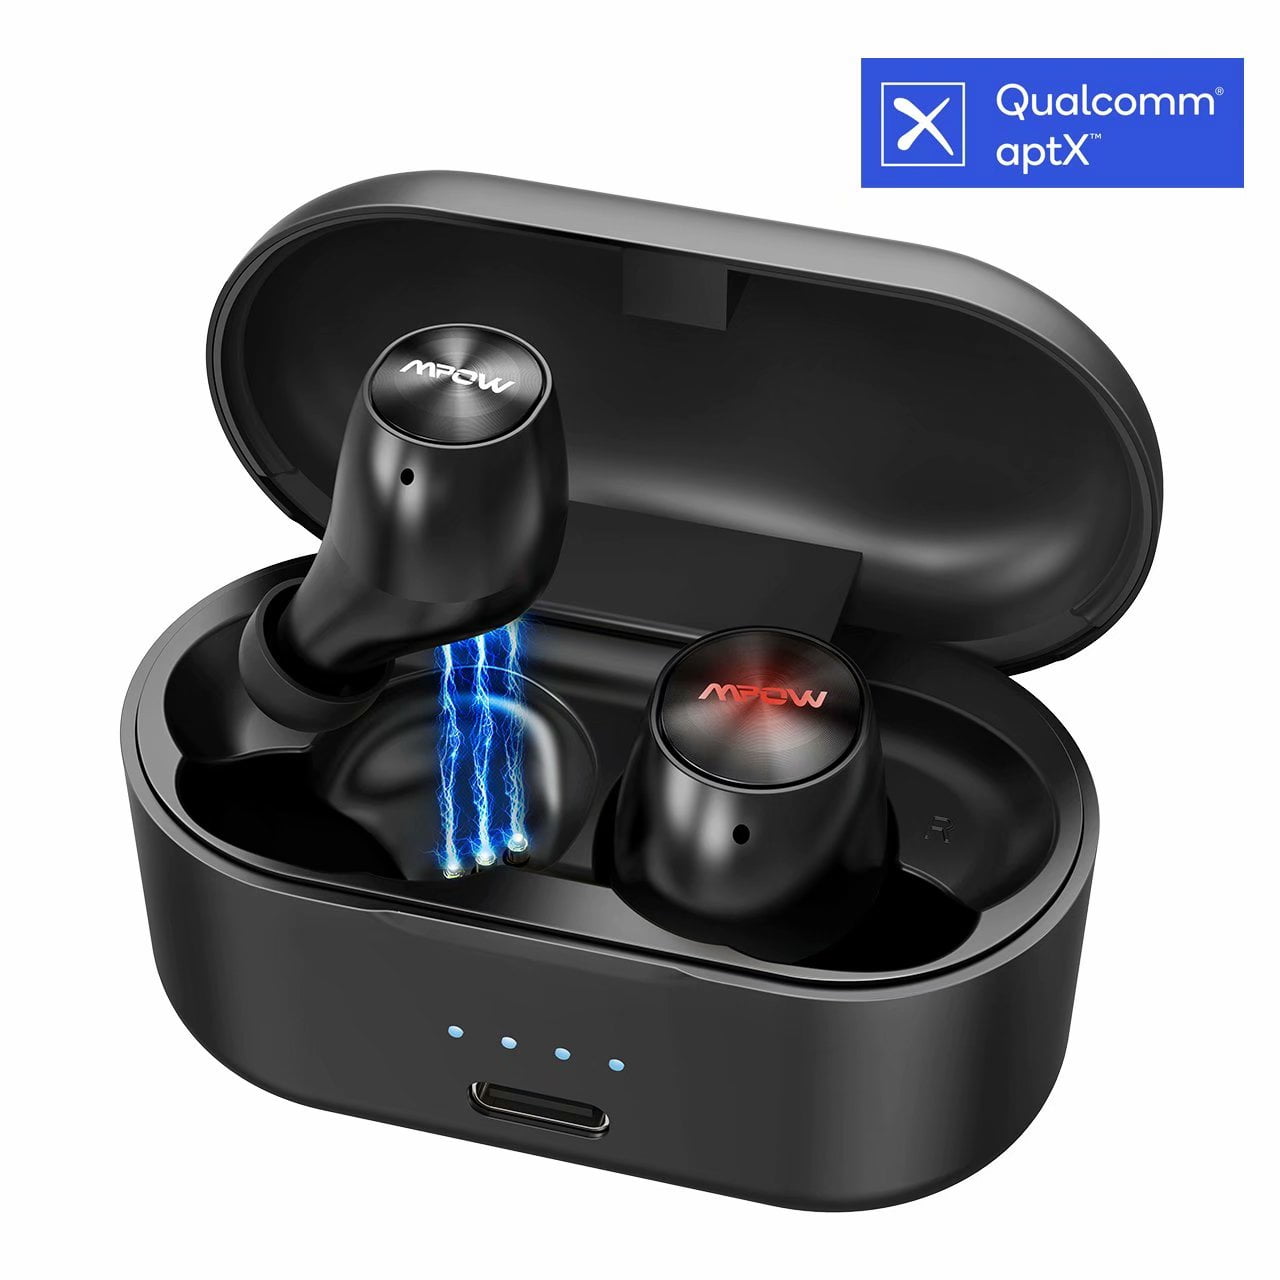 Mpow Bluetooth Earbuds aptX Tech Stereo Bass Sound 42H Playtime / IPX7 Sweatproof / BT5.0 / CVC 8.0 Noise Cancellation/Leather Charging Case Wireless Earbuds Black 